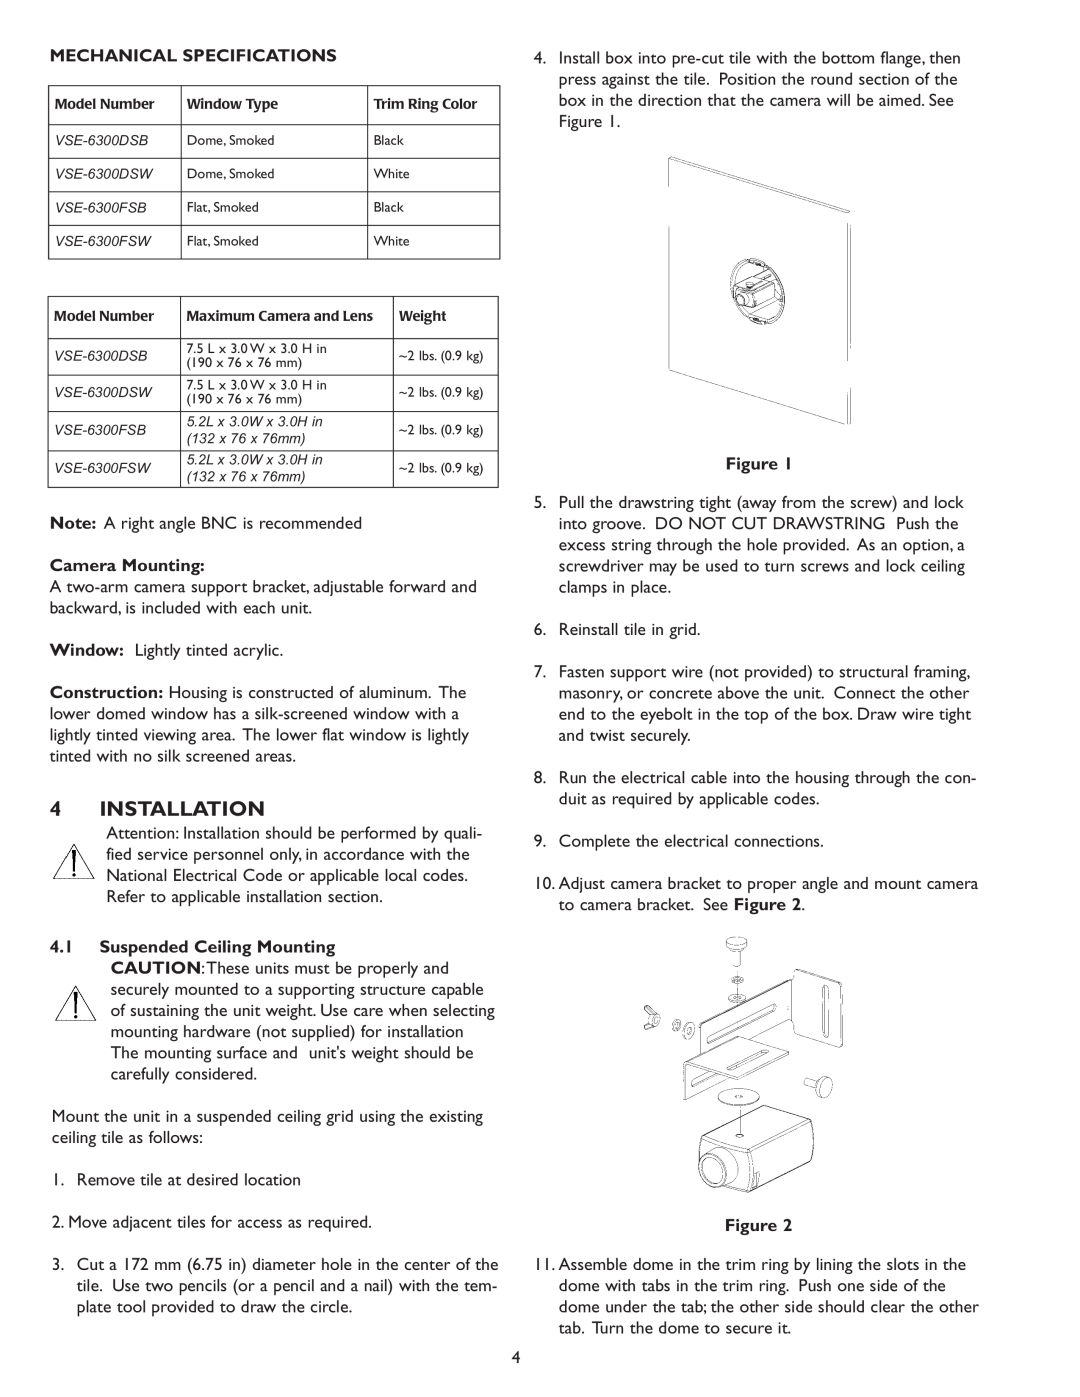 Sanyo VSE-6300 instruction manual Installation, Mechanical Specifications, Camera Mounting, 4.1Suspended Ceiling Mounting 